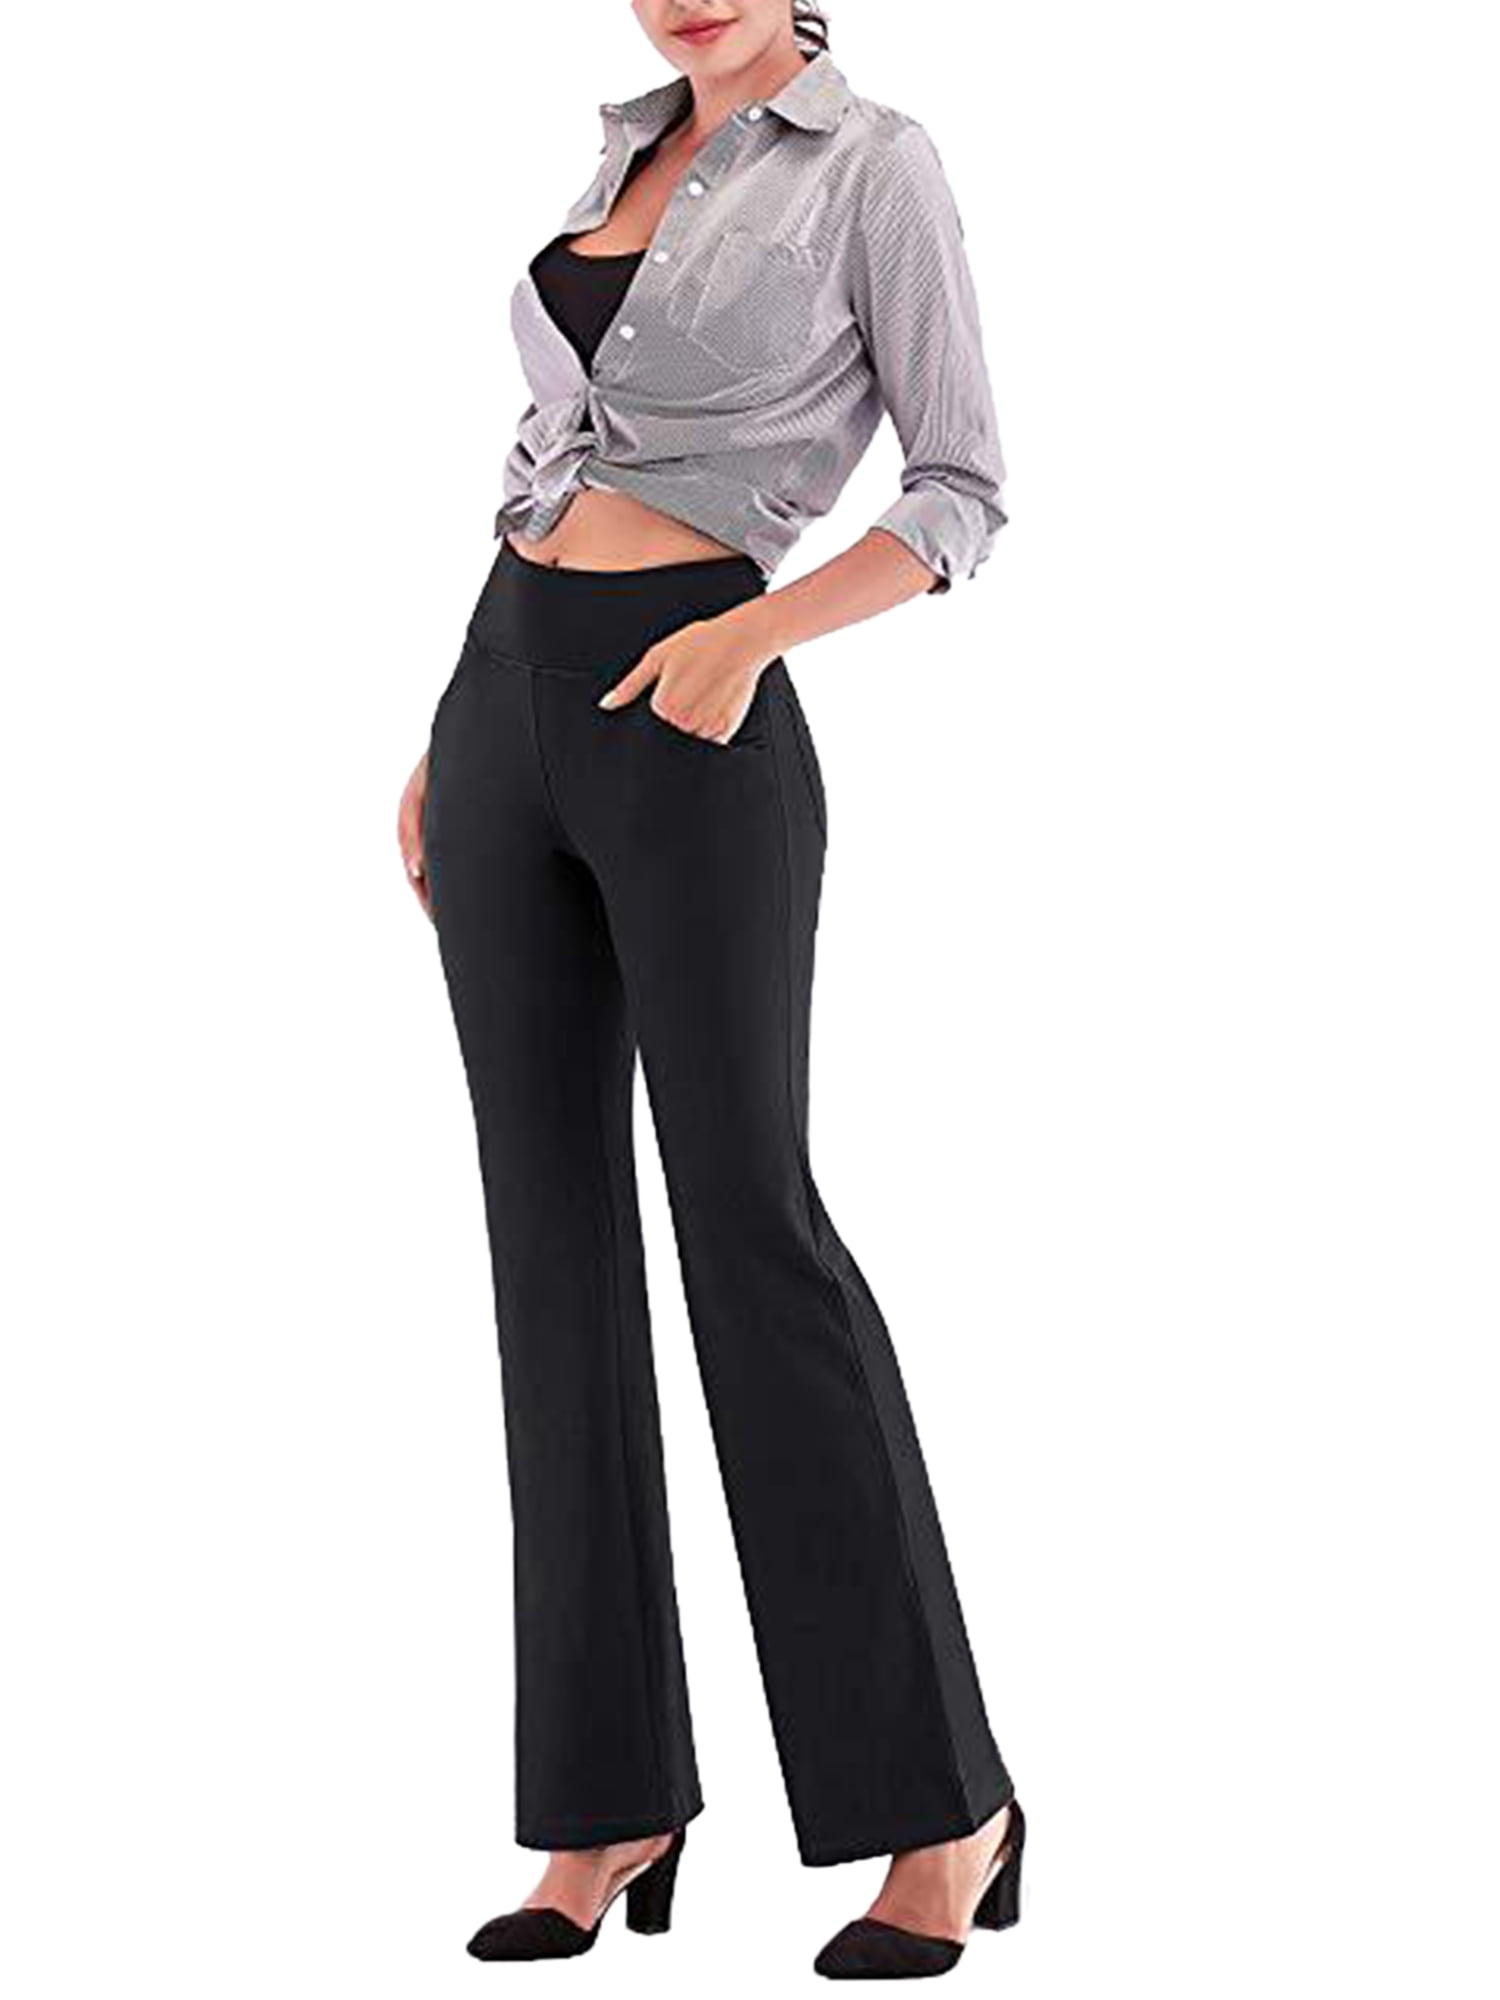 FN Store Womens Yoga Dress Pants Stretchy Work Slacks Business Casual  Office Straight LegBootcut Elastic Waist with 2 Pockets Regular Fit Trouser